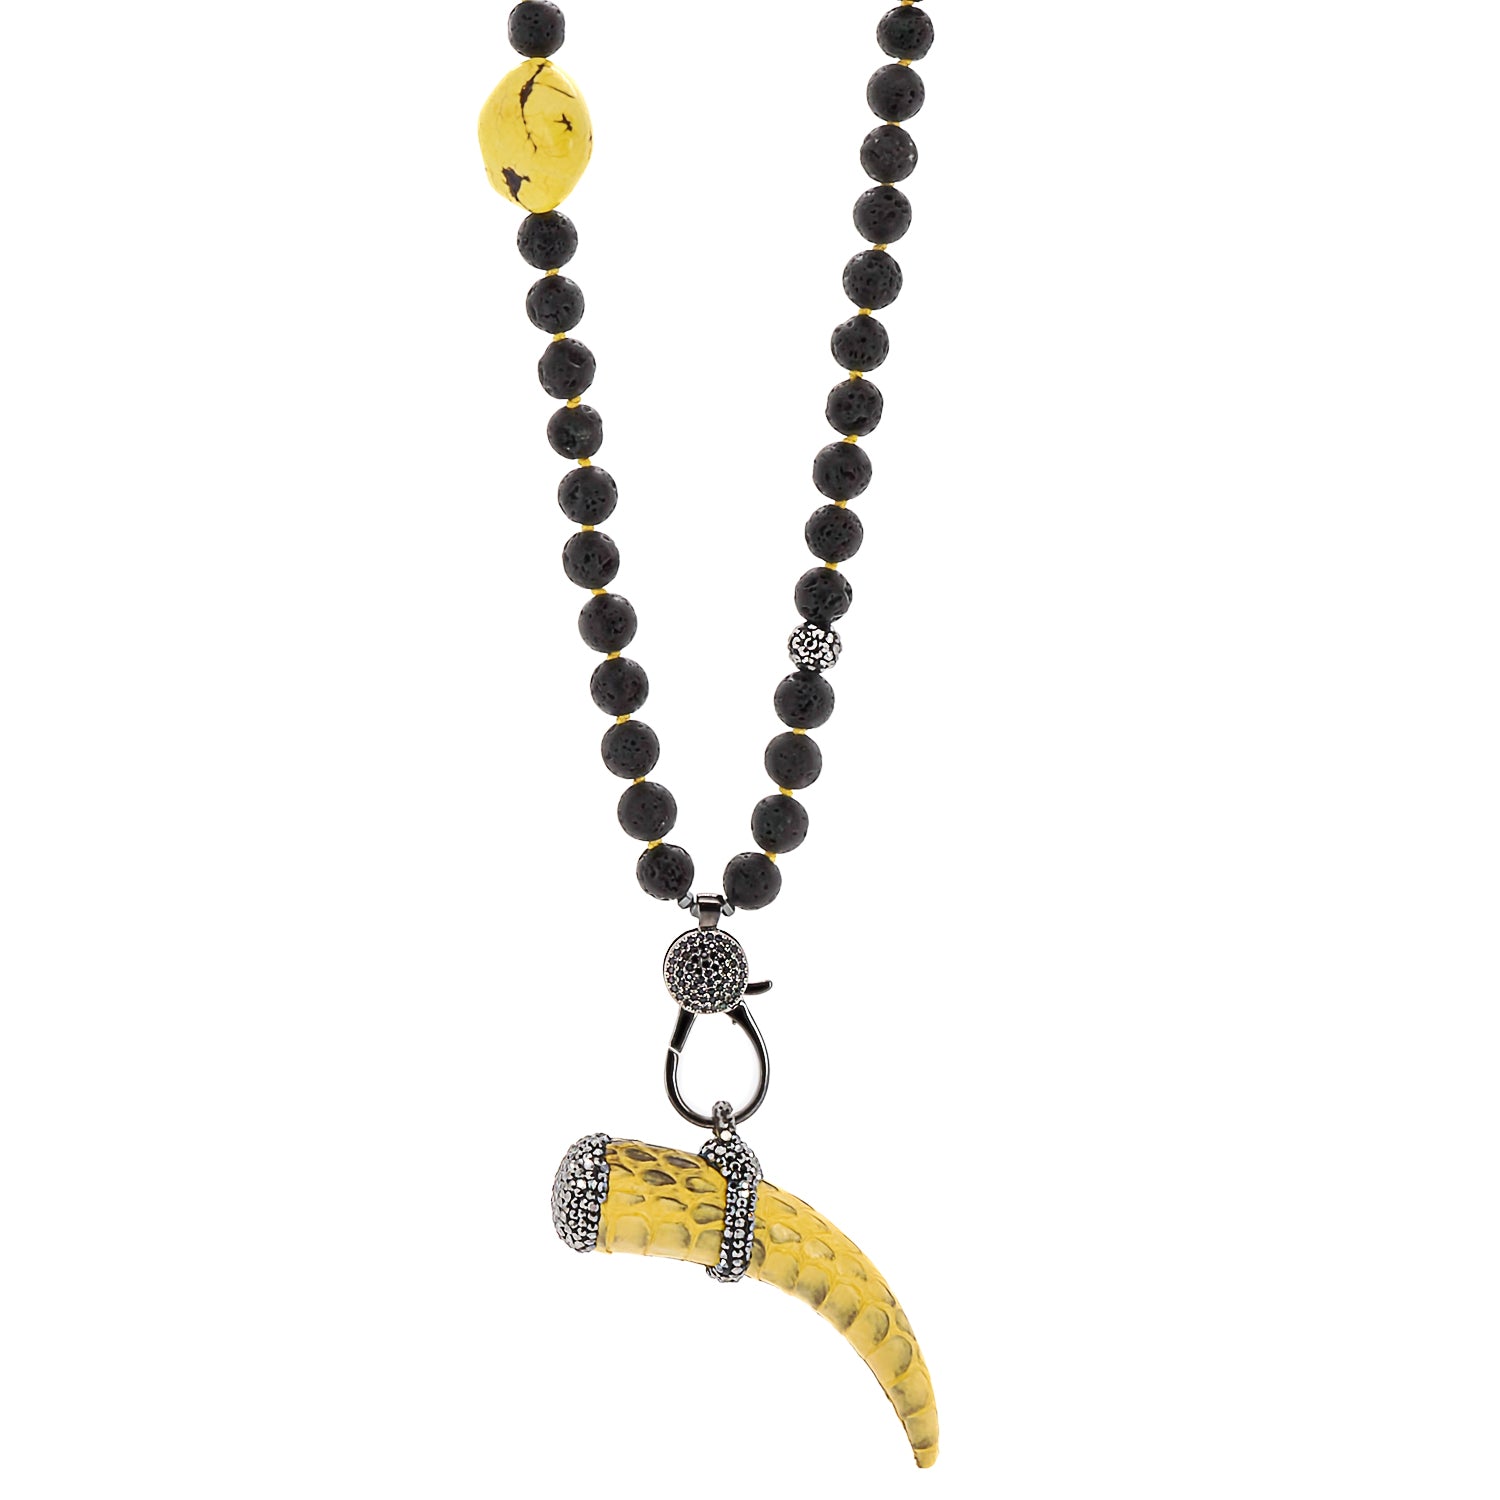 Spirit Cornicello Unique Necklace featuring a striking yellow and zircon Cornicello pendant, symbolizing protection and good luck, complemented by lava rock stones and Zircon beads for a powerful and meaningful accessory.